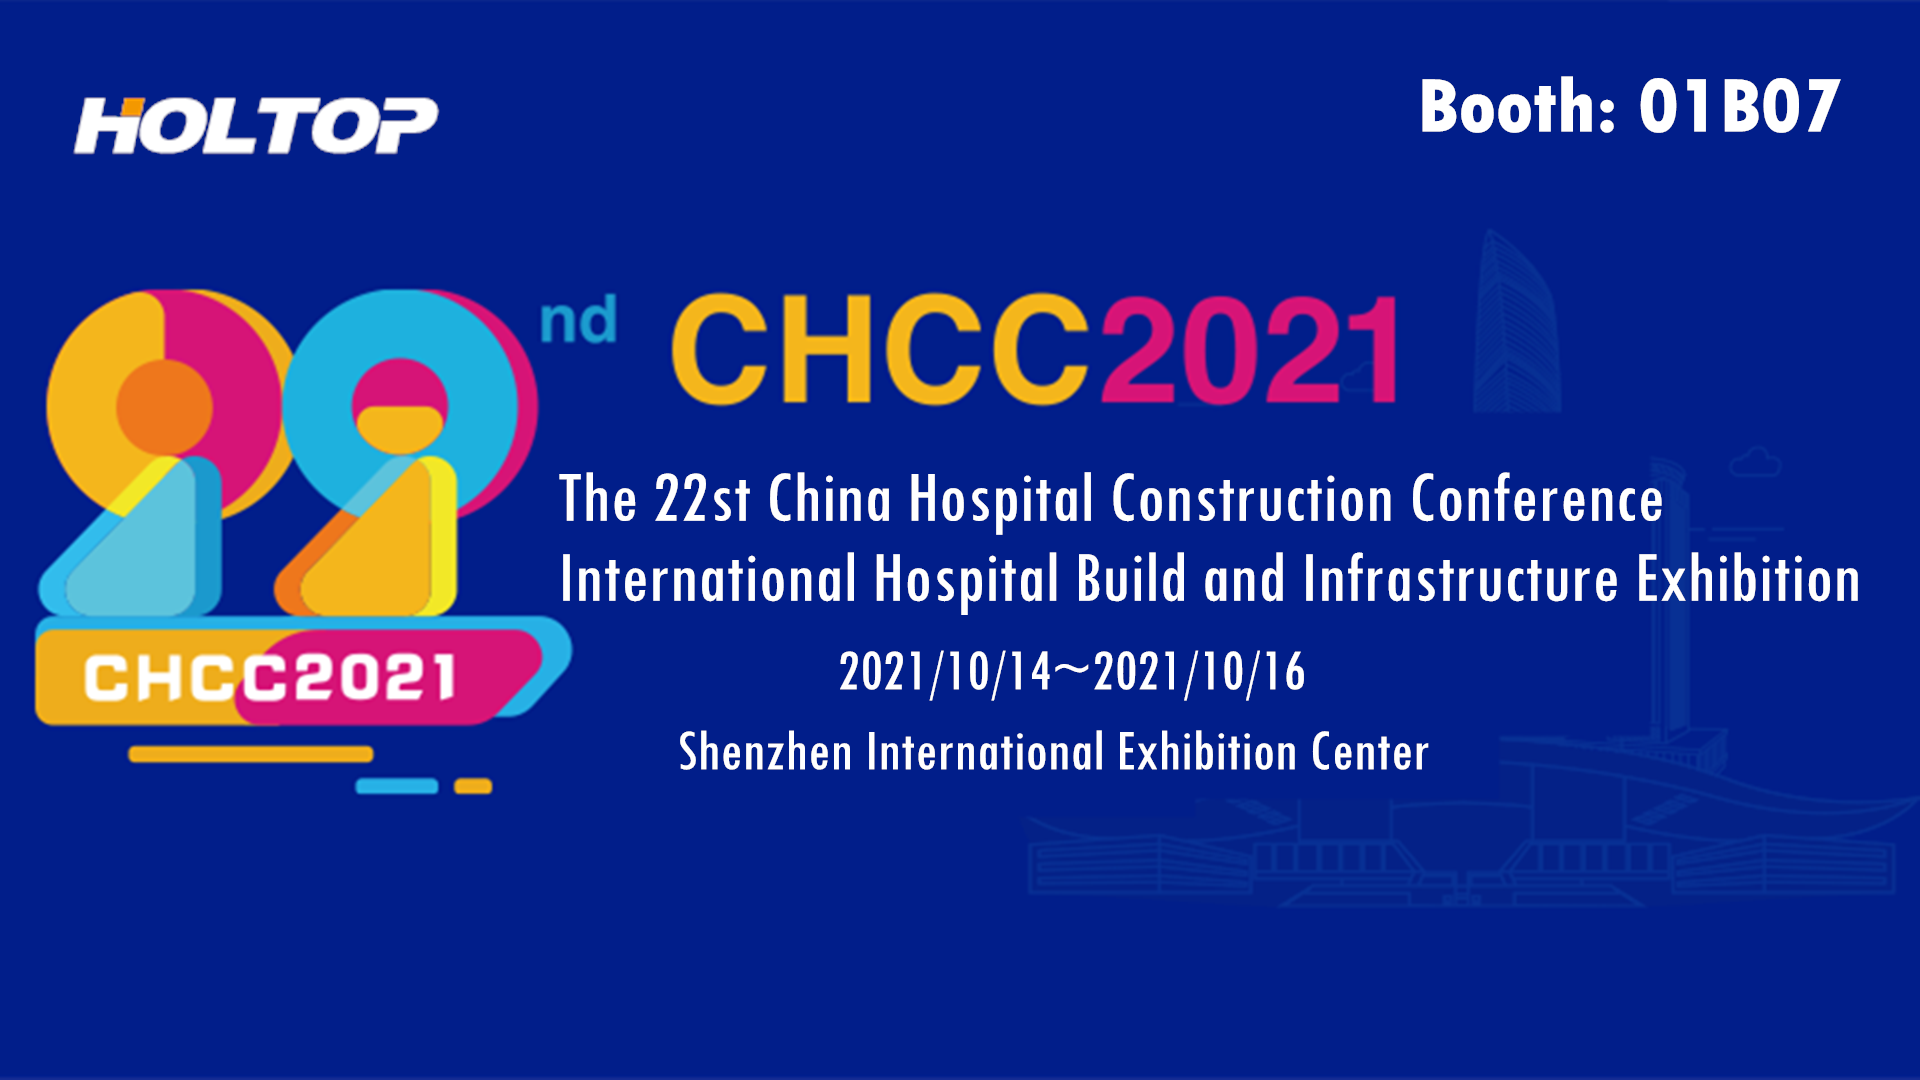 Holtop woont de 22e China Hospital Construction Conference bij International Hospital Build and Infrastructure Exhibition (CHCC2021)